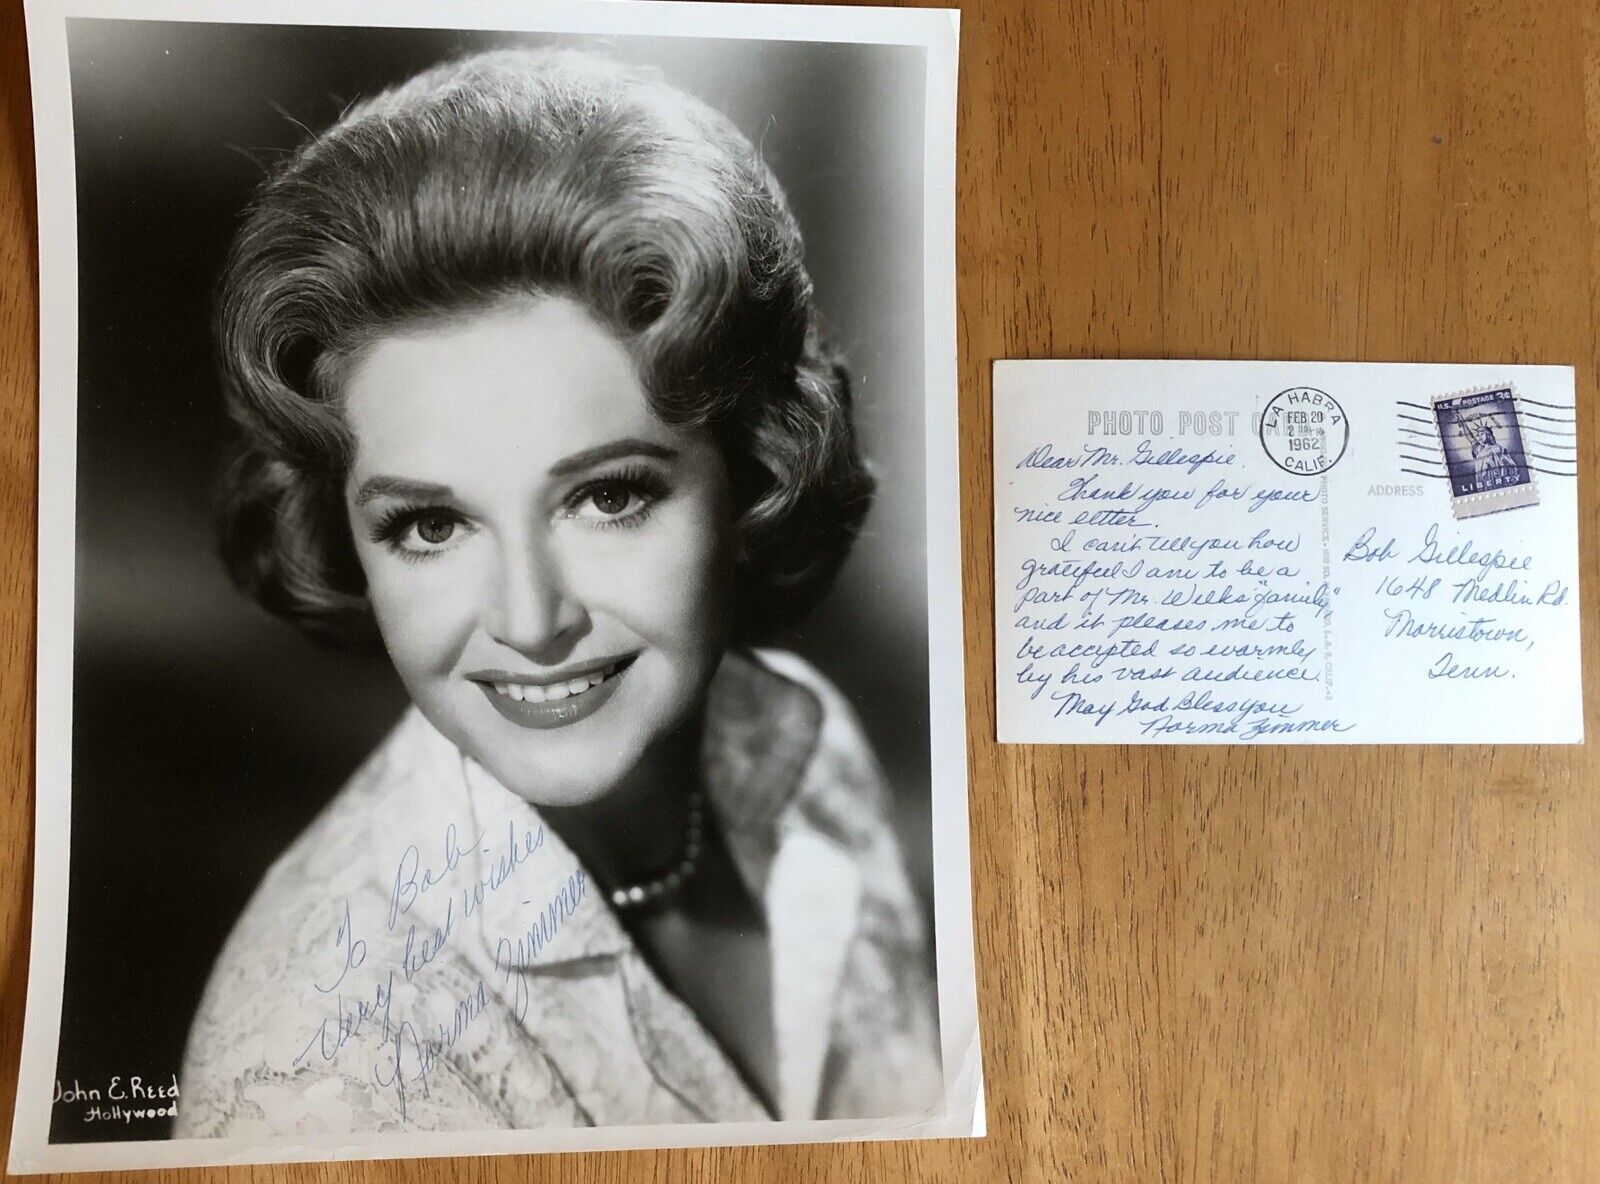 Singer Norma Zimmer, Lawrence Welk's "champagne Lady" Autograph Photo Letter